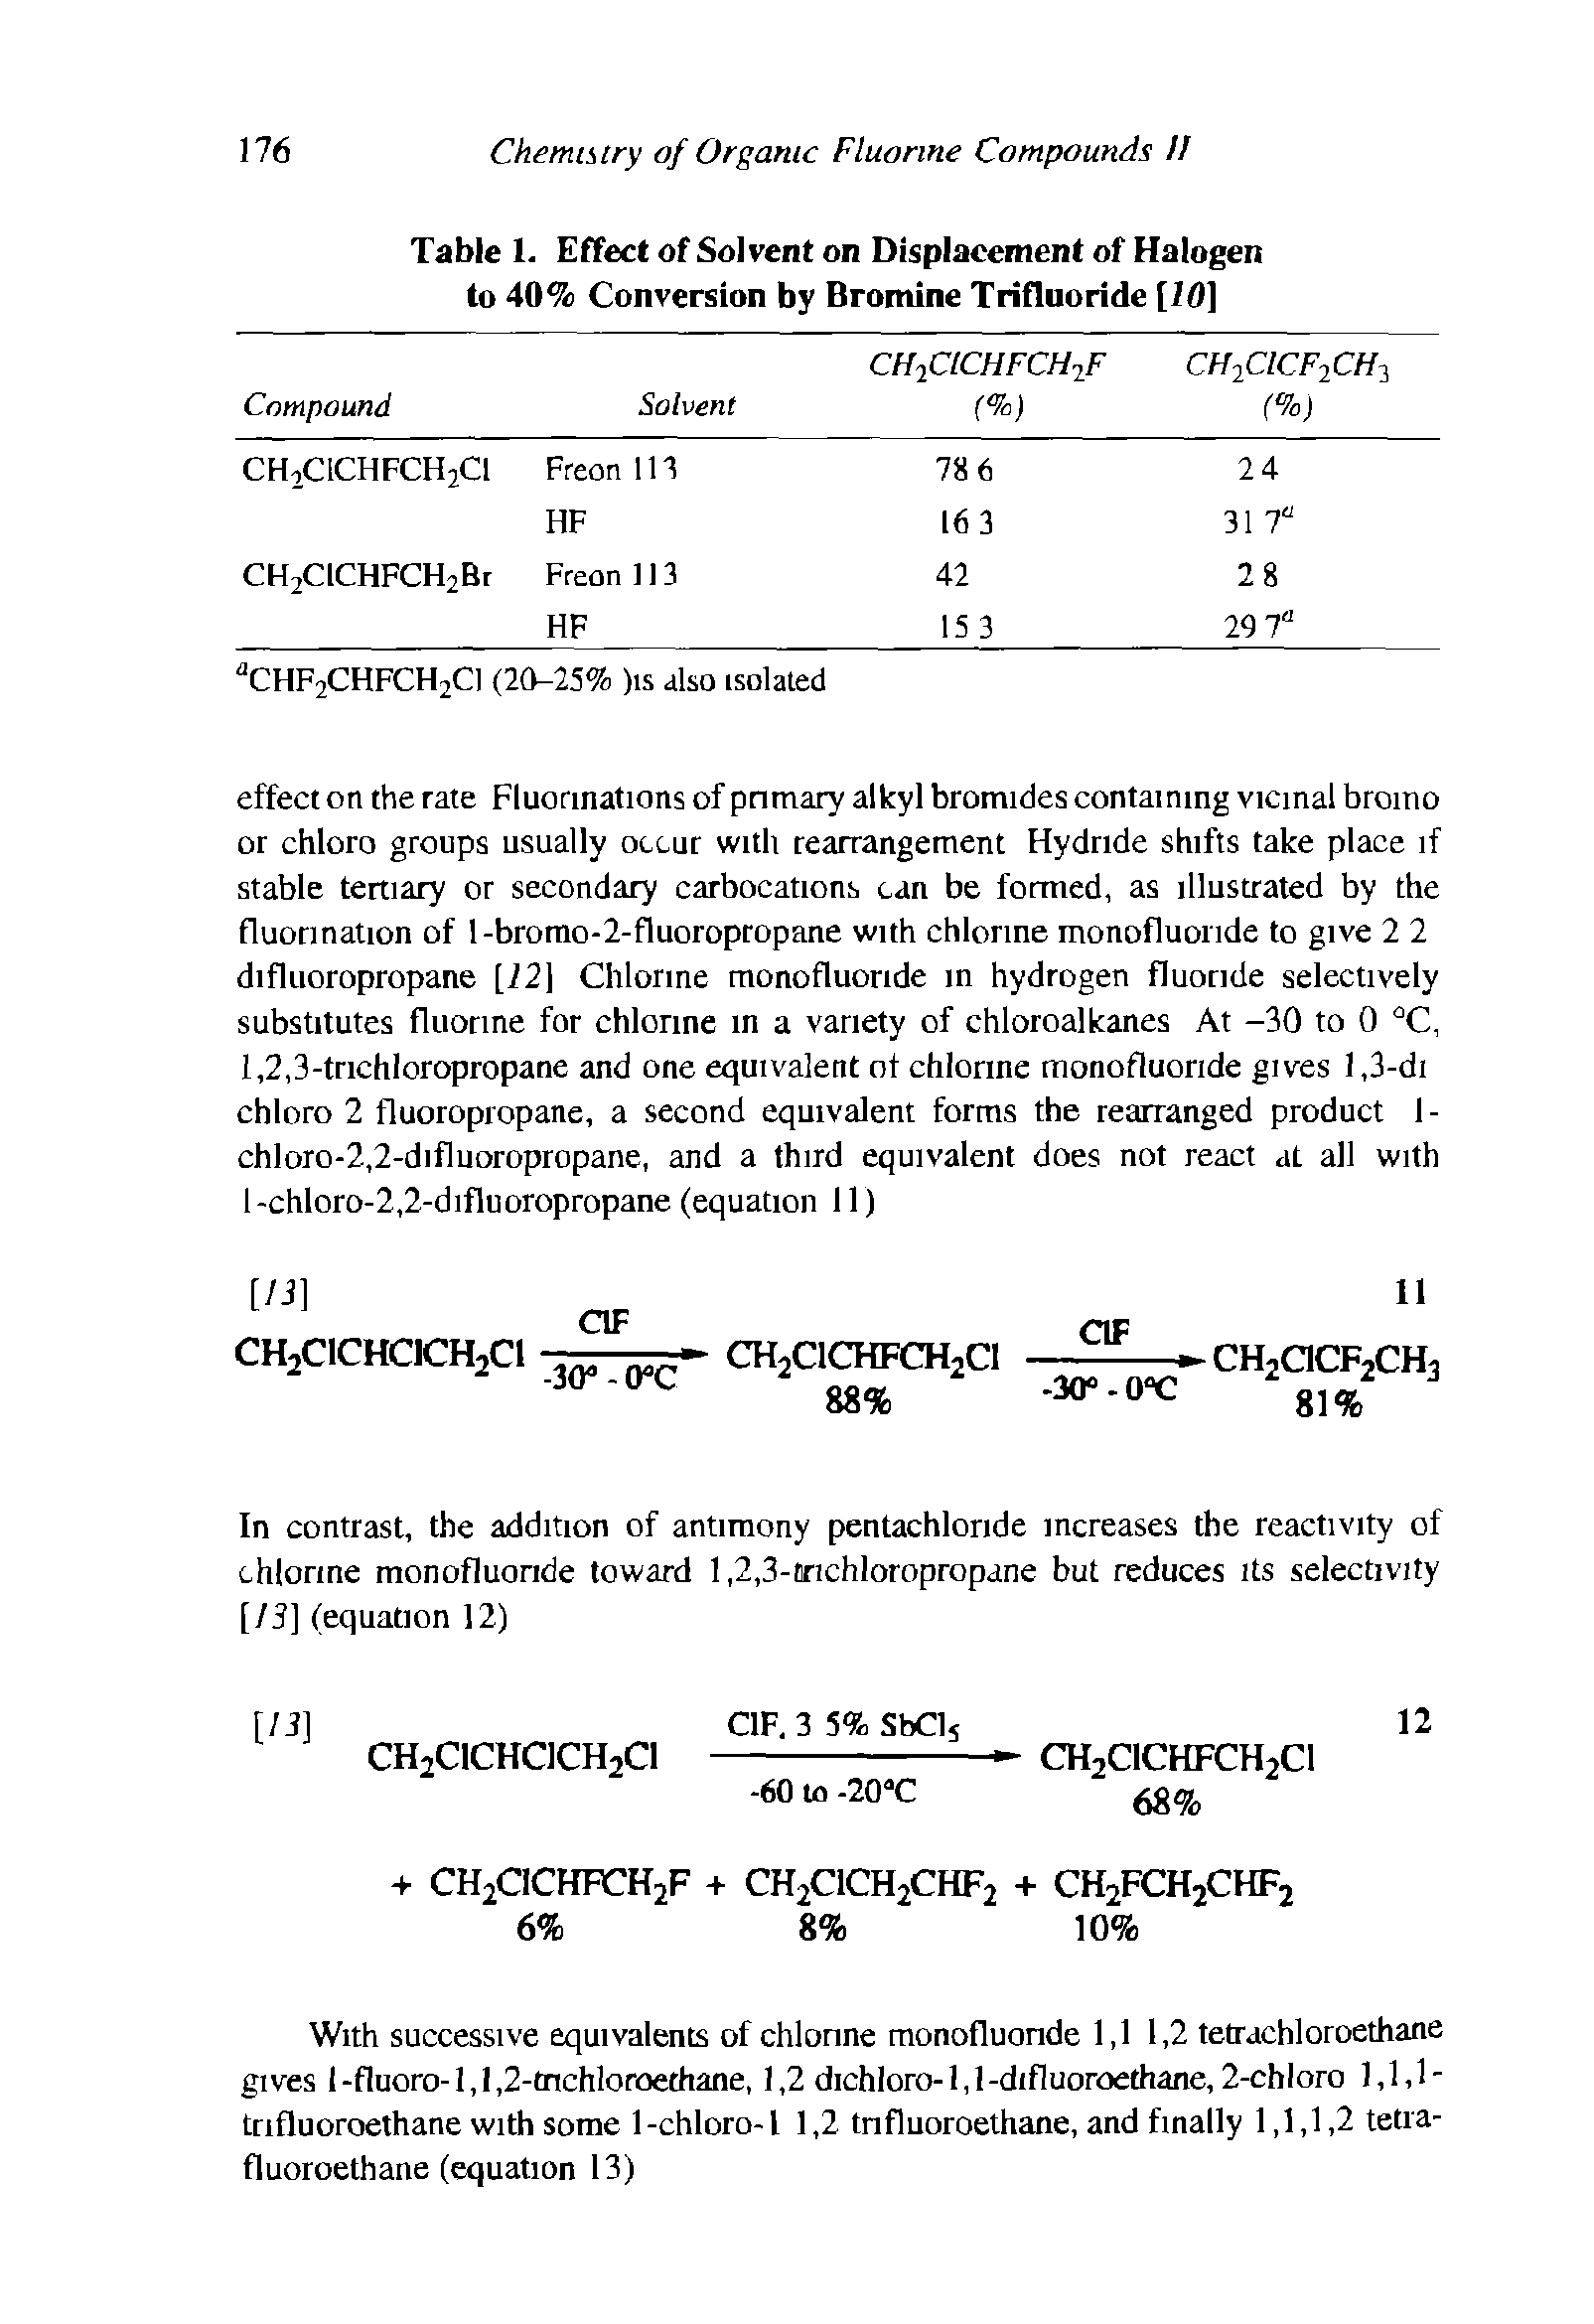 Table 1. Effect of Solvent on Displacement of Halogen to 40% Conversion by Bromine Trifluoride [10]...